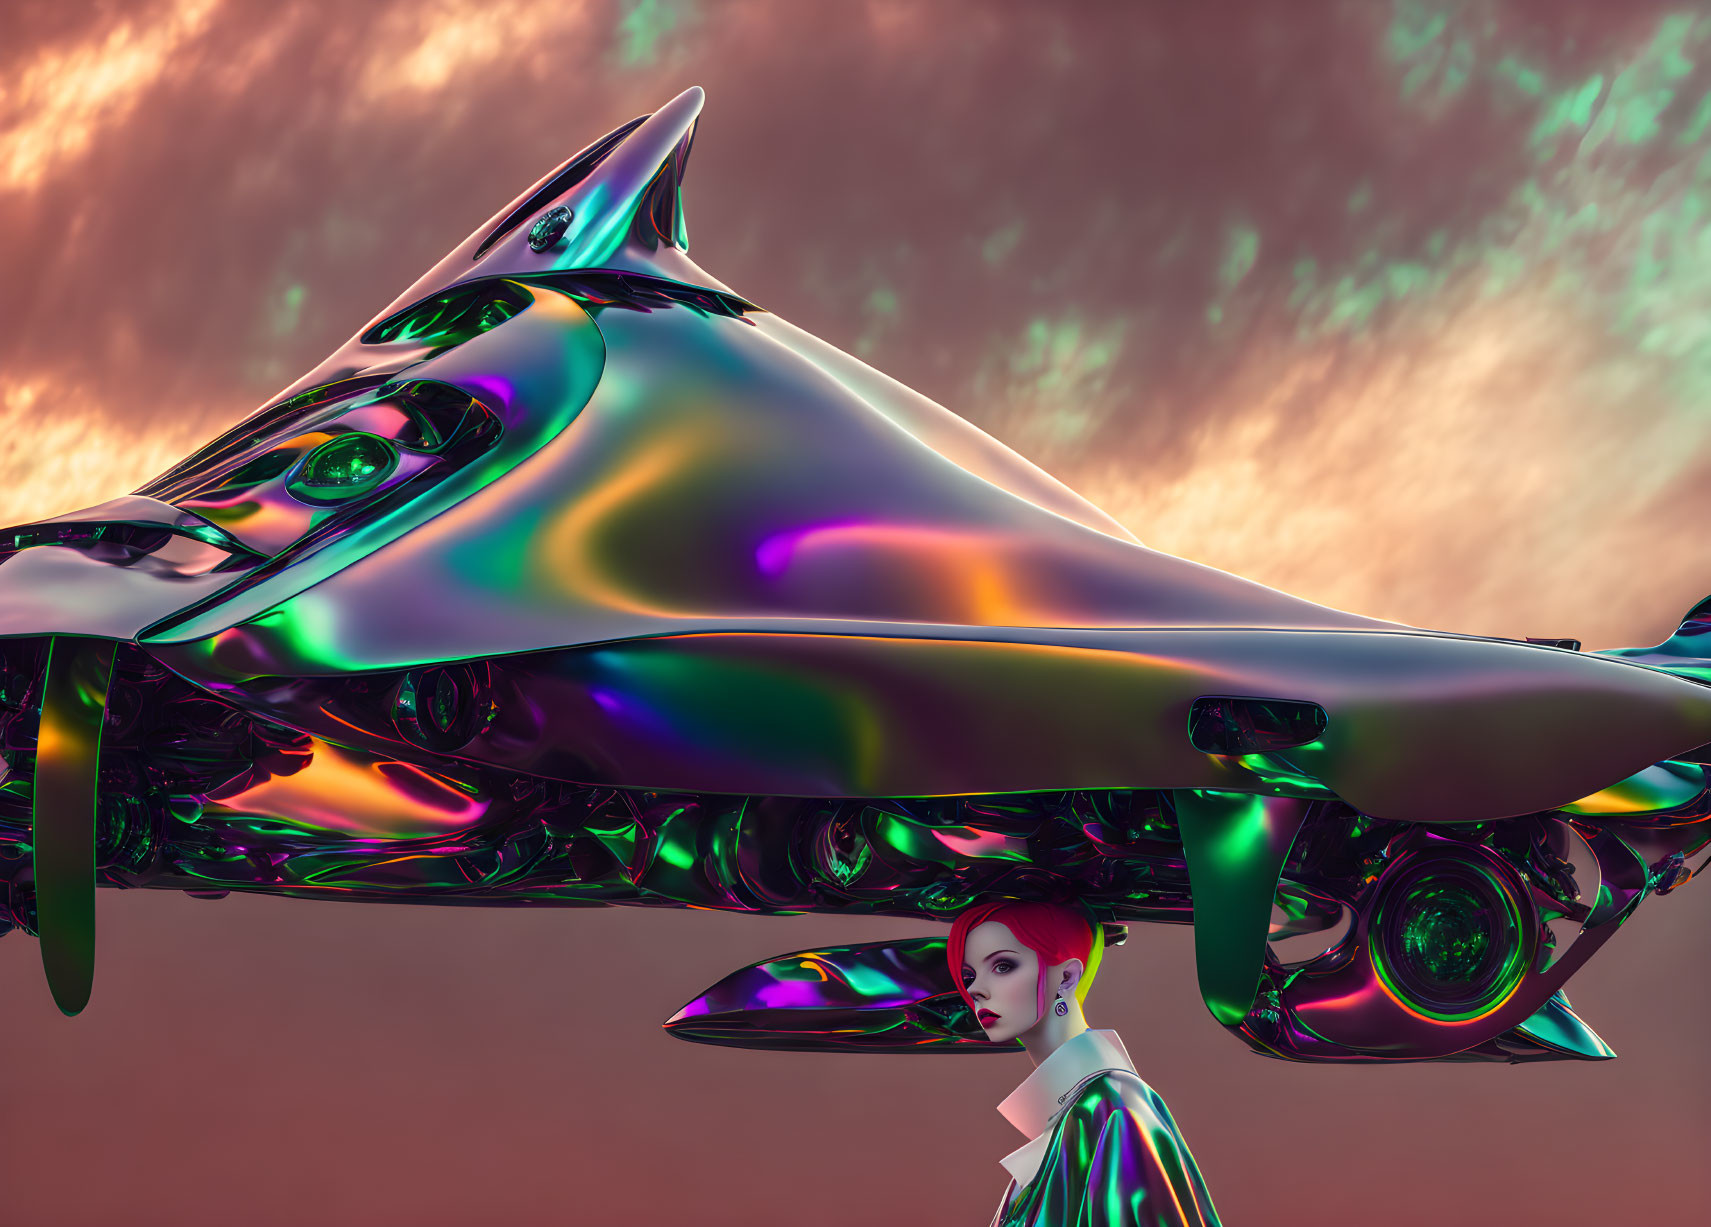 Futuristic iridescent vehicle with humanoid figure in porcelain skin emerging against pink sky